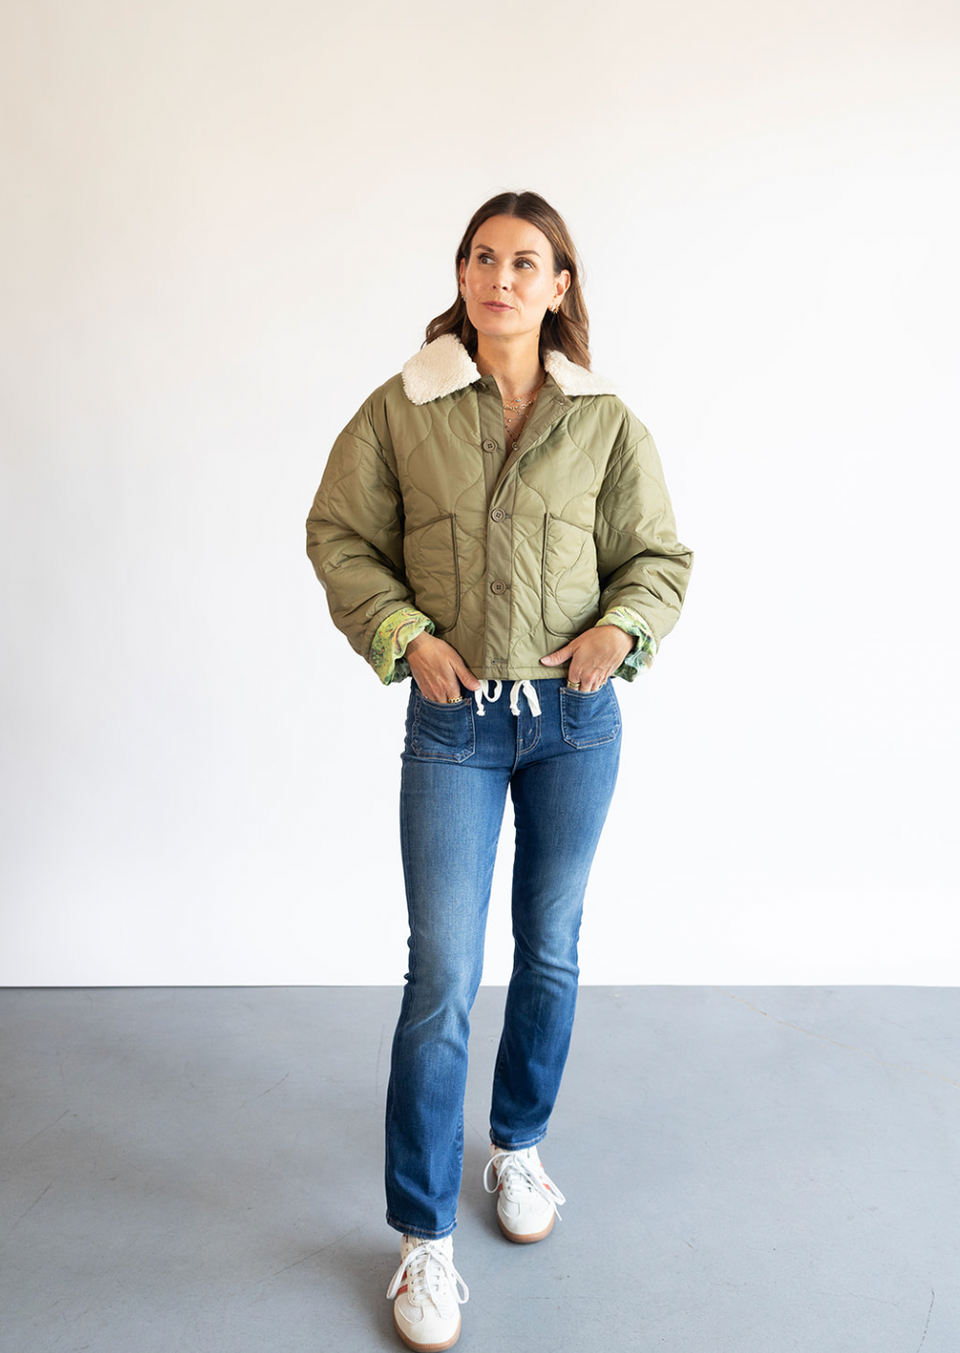 The Mother Denim Army Brat Jacket in Rank & File